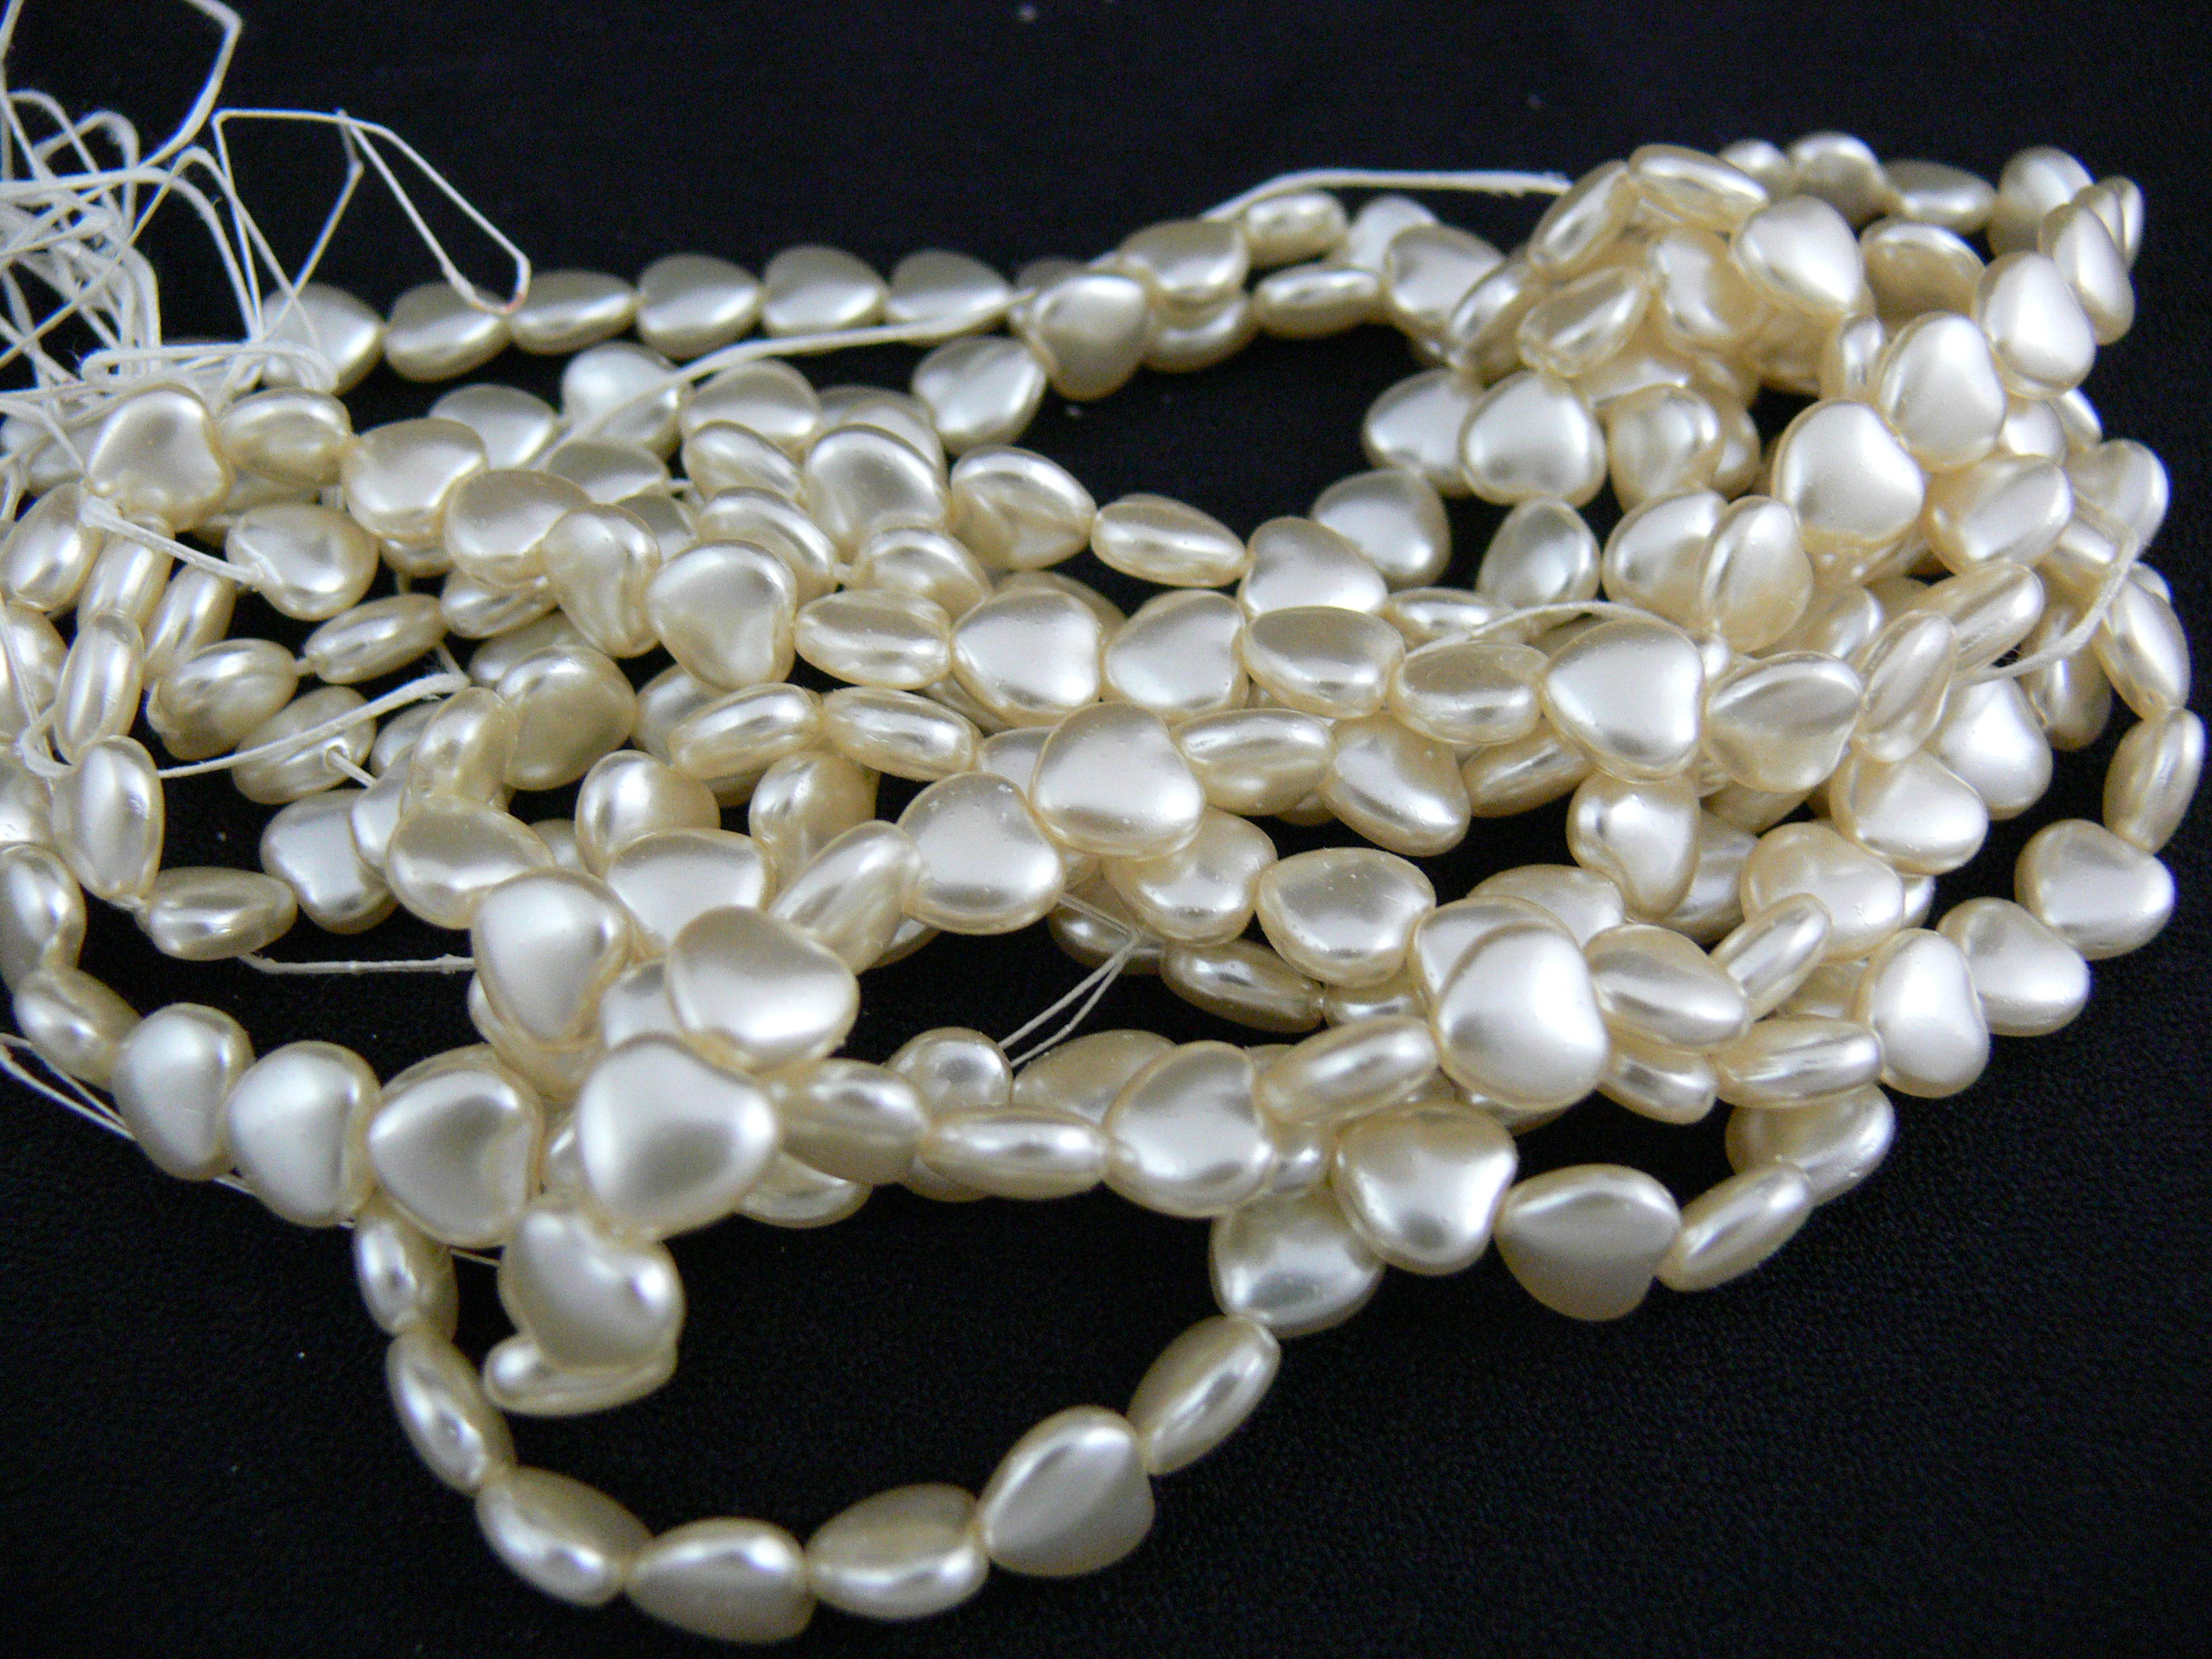 Heart shaped White pearls